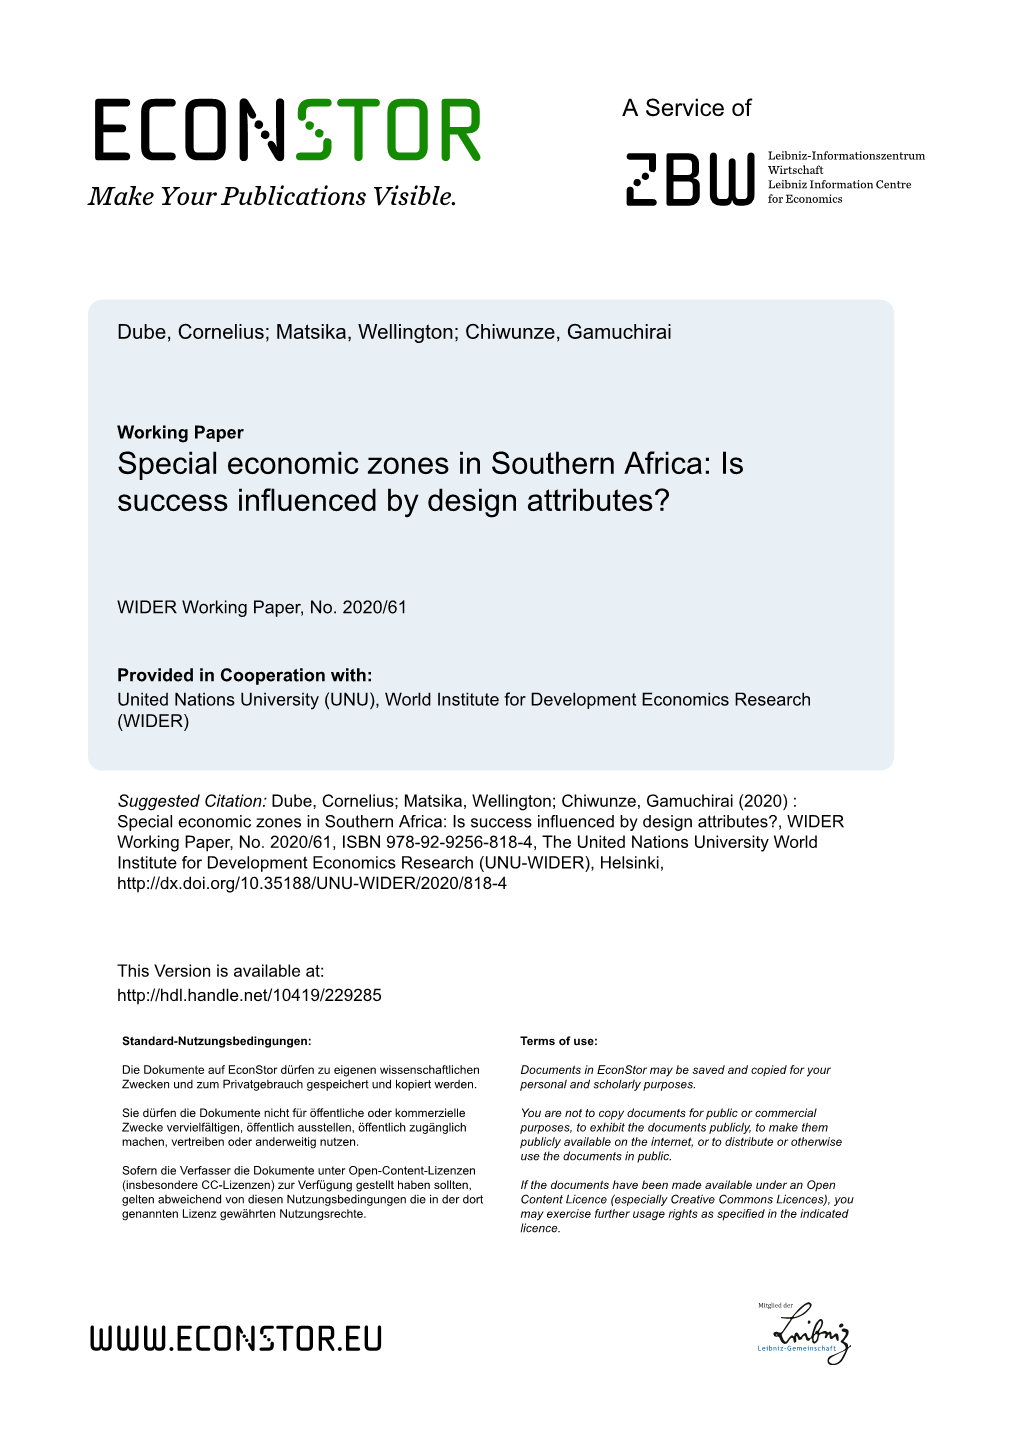 Special Economic Zones in Southern Africa: Is Success Influenced by Design Attributes?